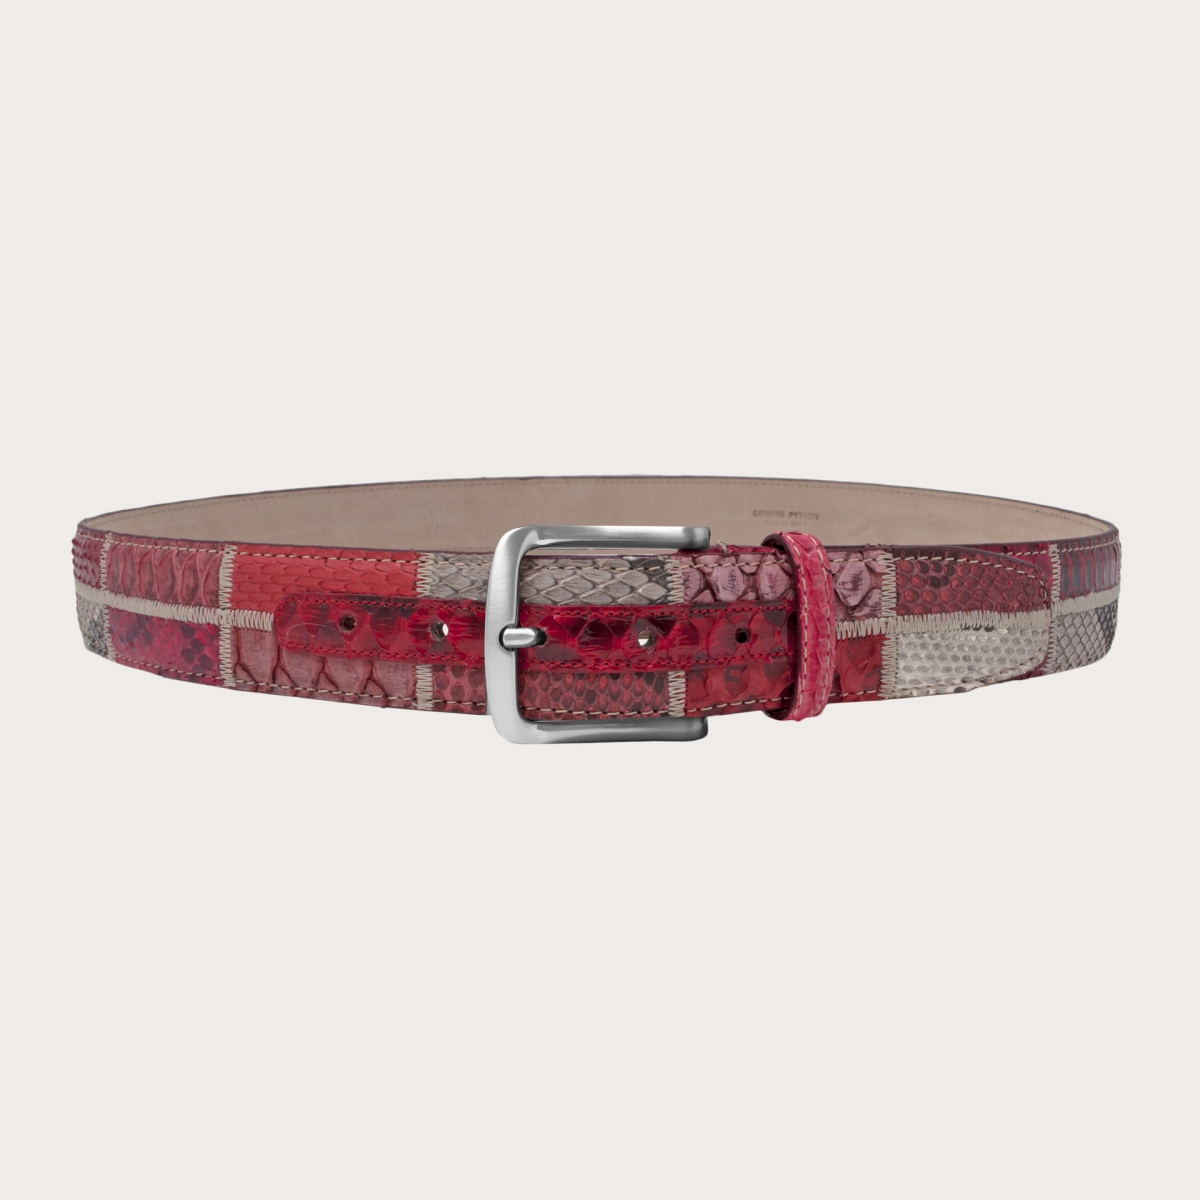 BRUCLE Red belt in patchwork python